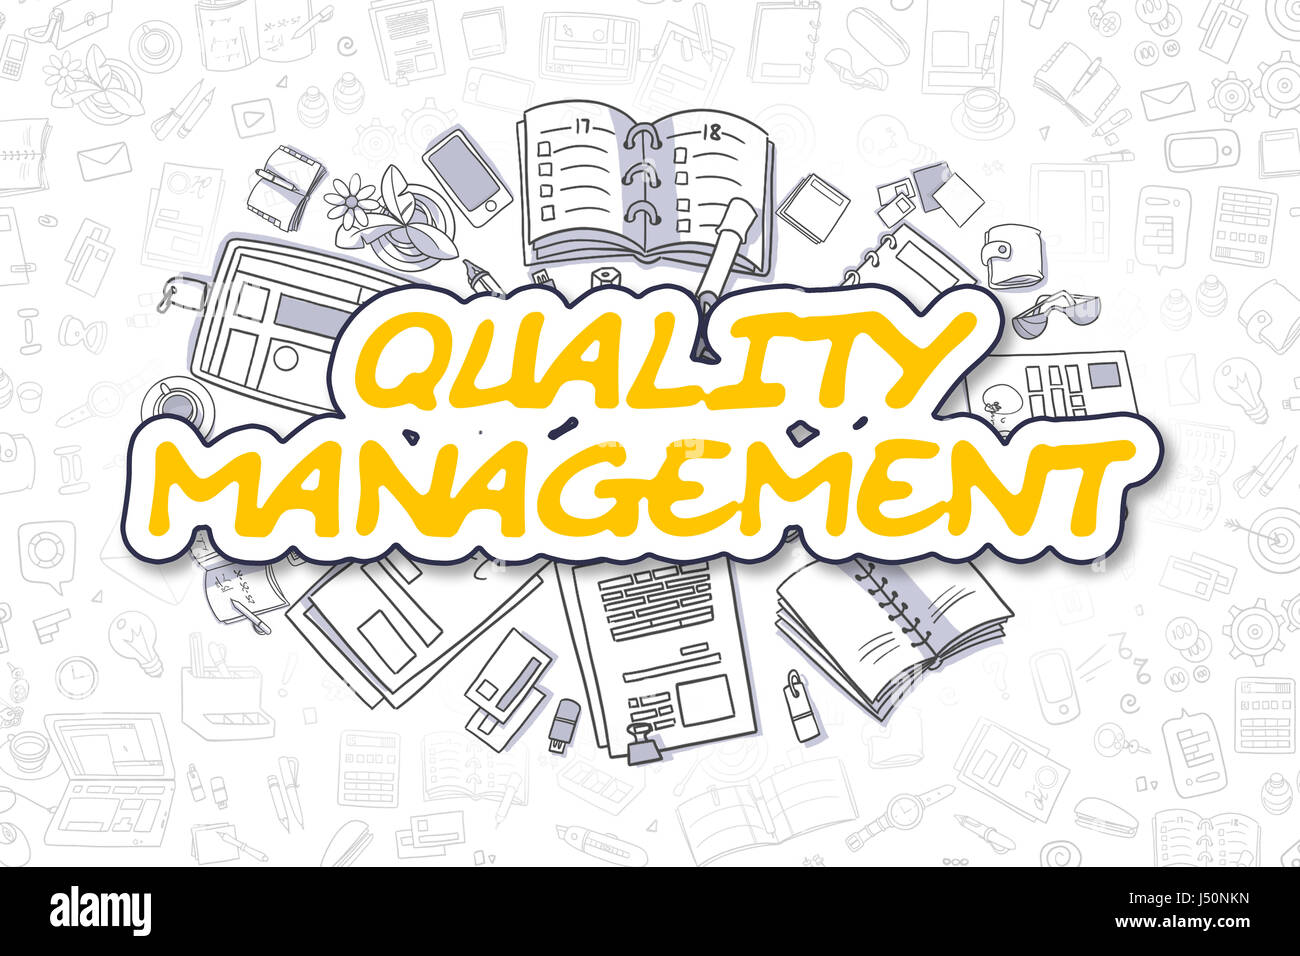 Quality Management - Doodle Yellow Text. Business Concept. Stock Photo